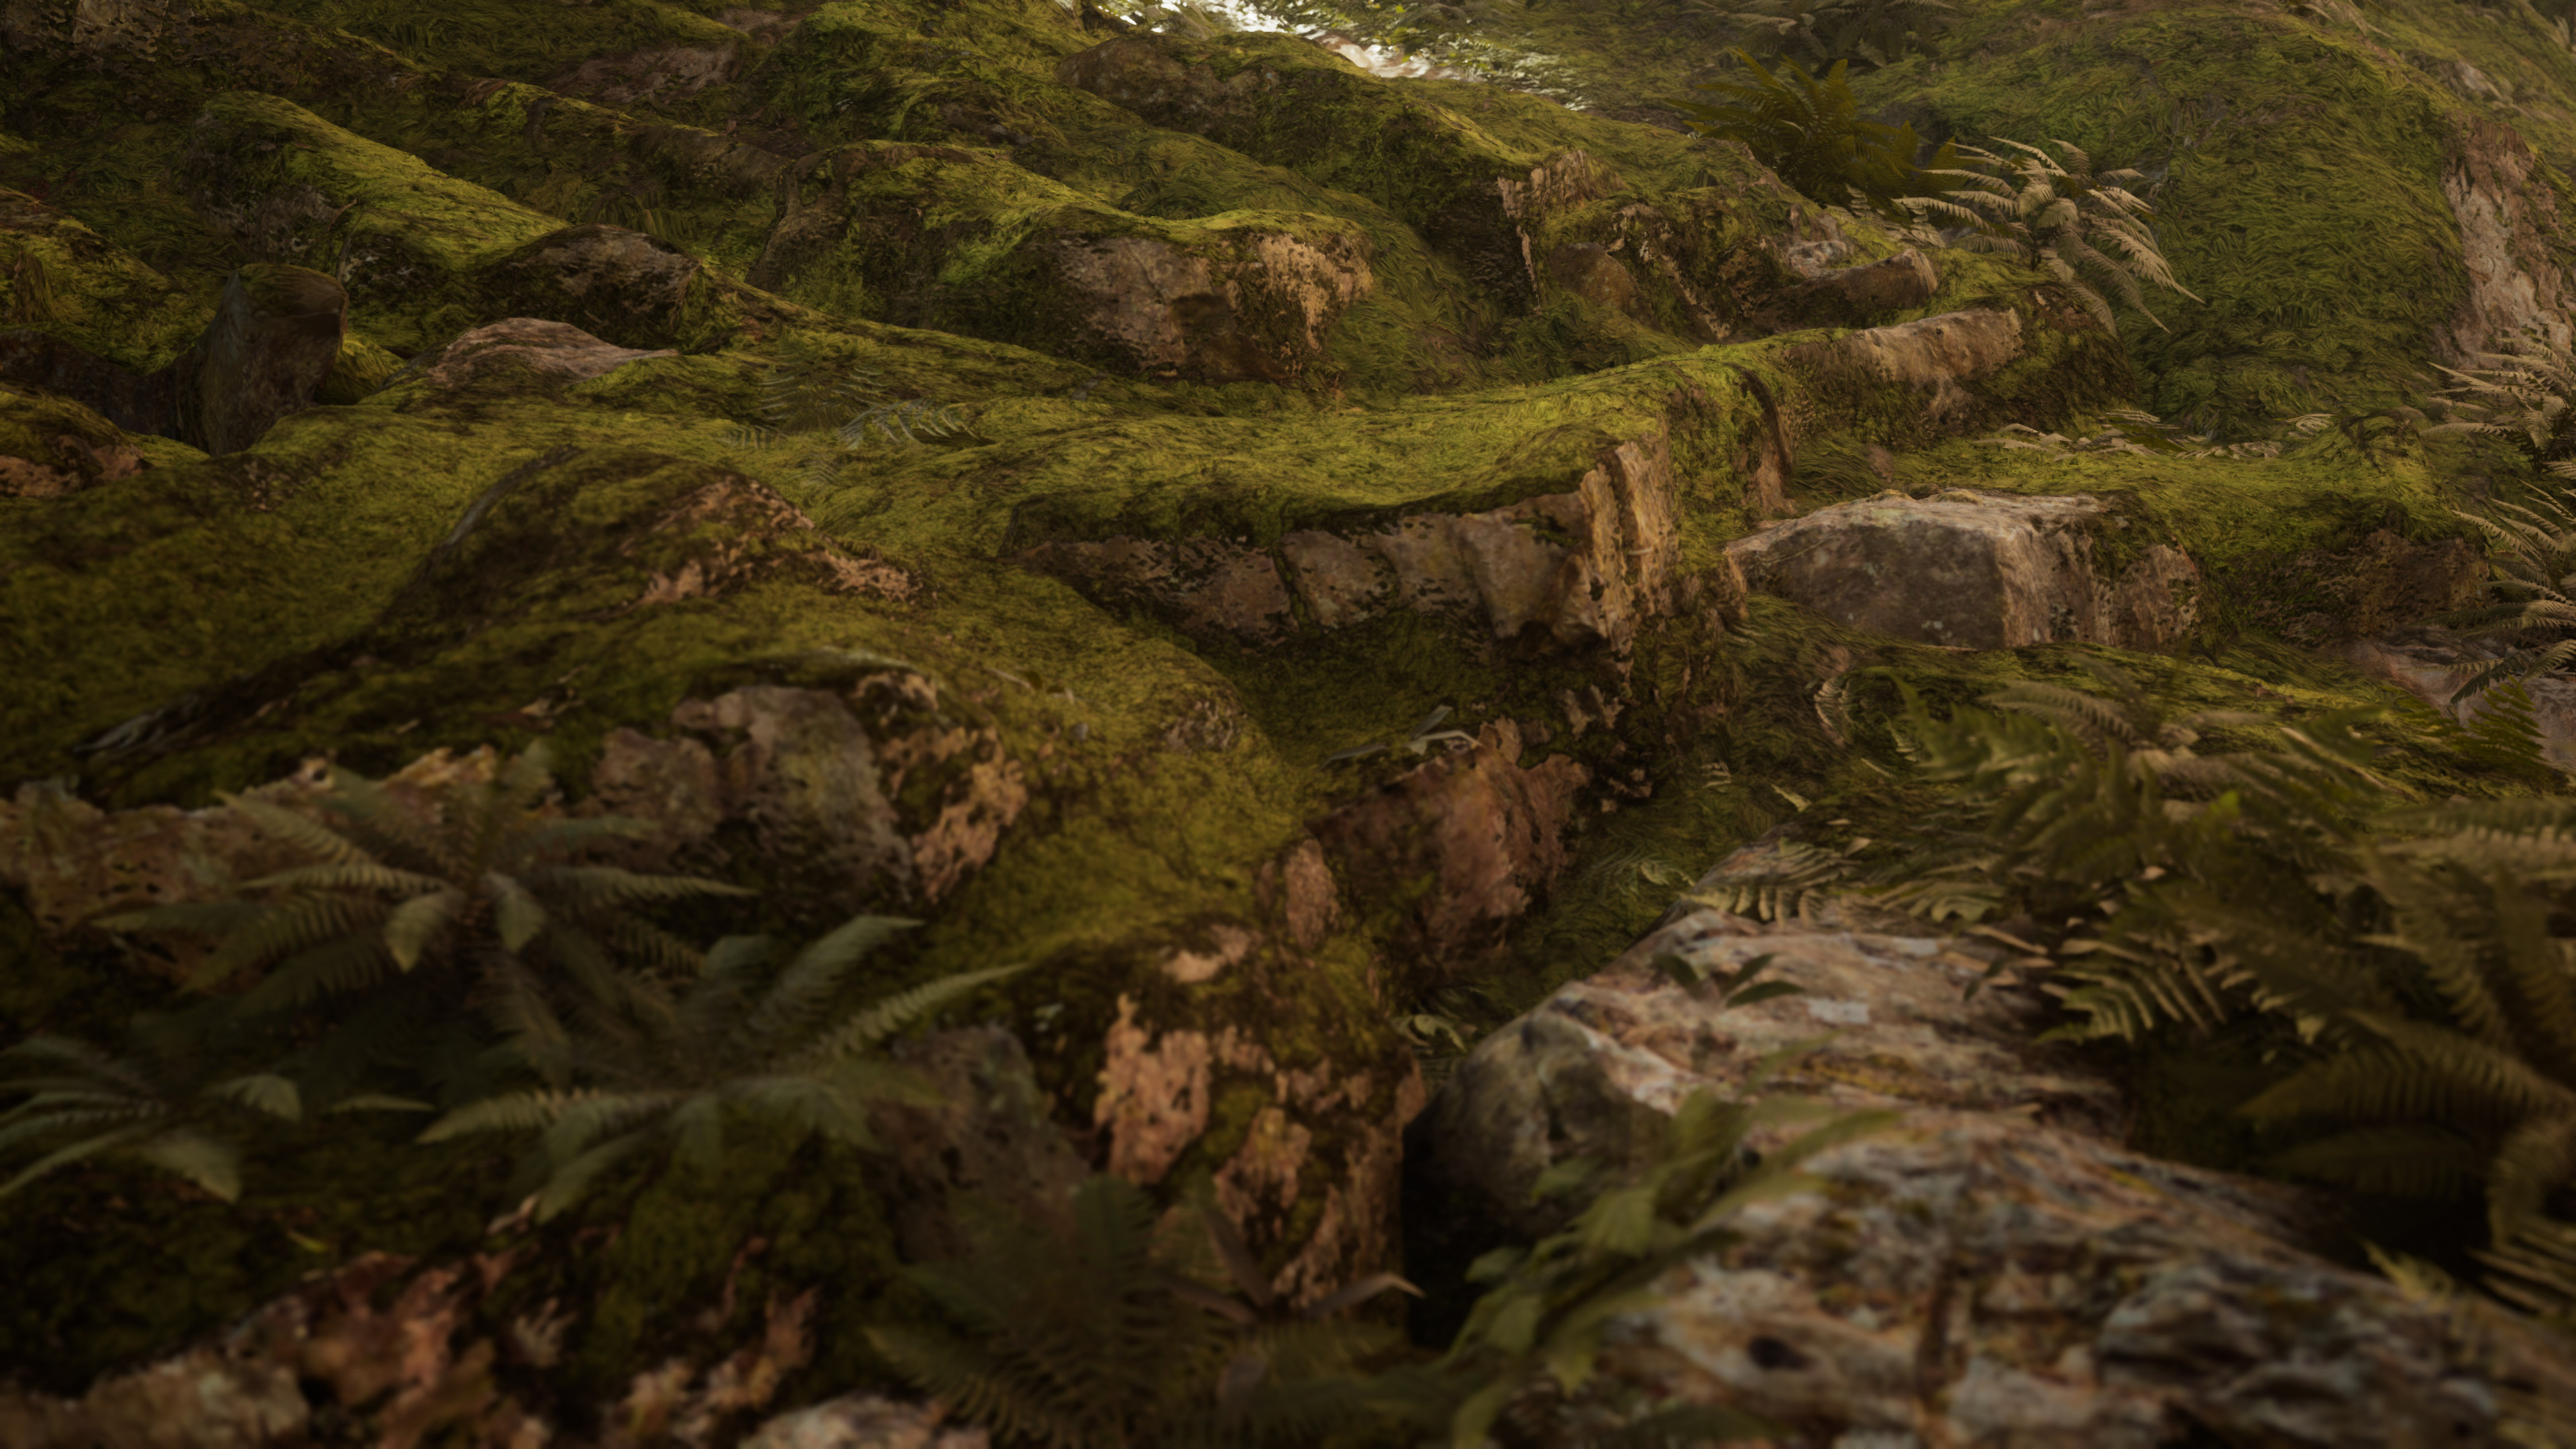 The moss material I created applied to photoscanned rock assets